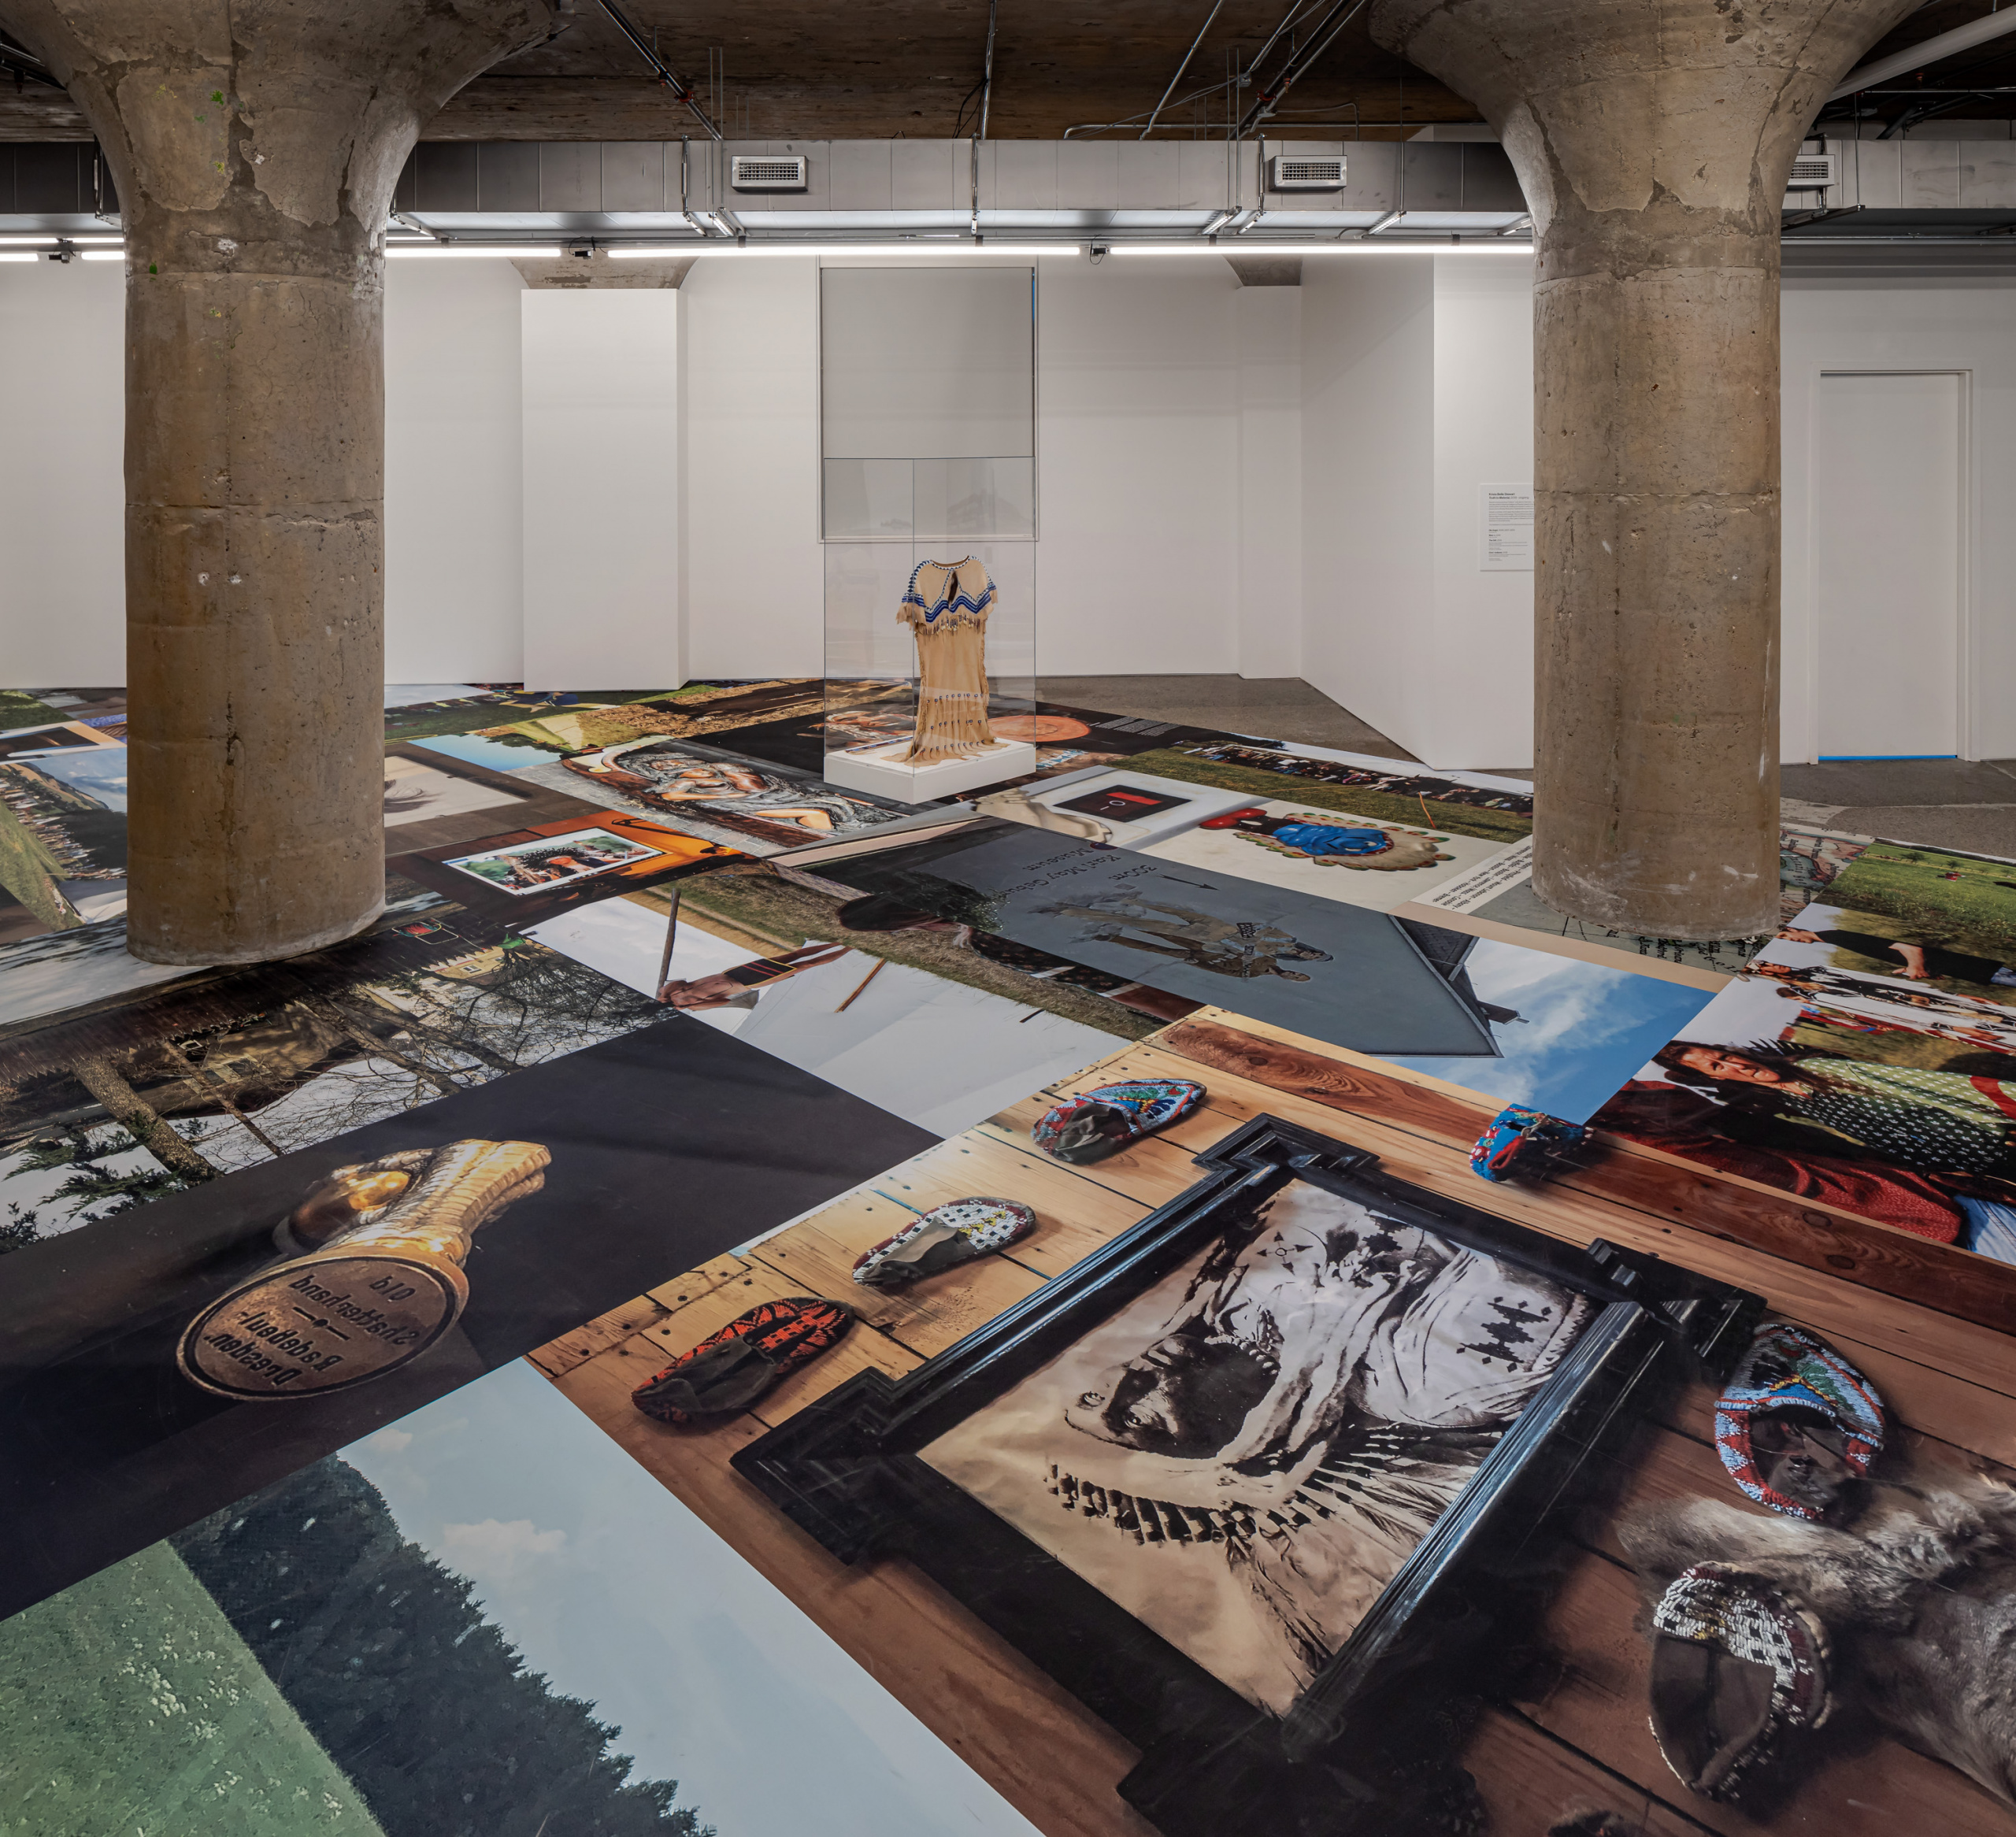 Krista Belle Stewart, Truth to Material, installation view, Museum of Contemporary Art Toronto, 2020–21. Courtesy of the artist and MOCA. Photo: Toni Hafkenscheid